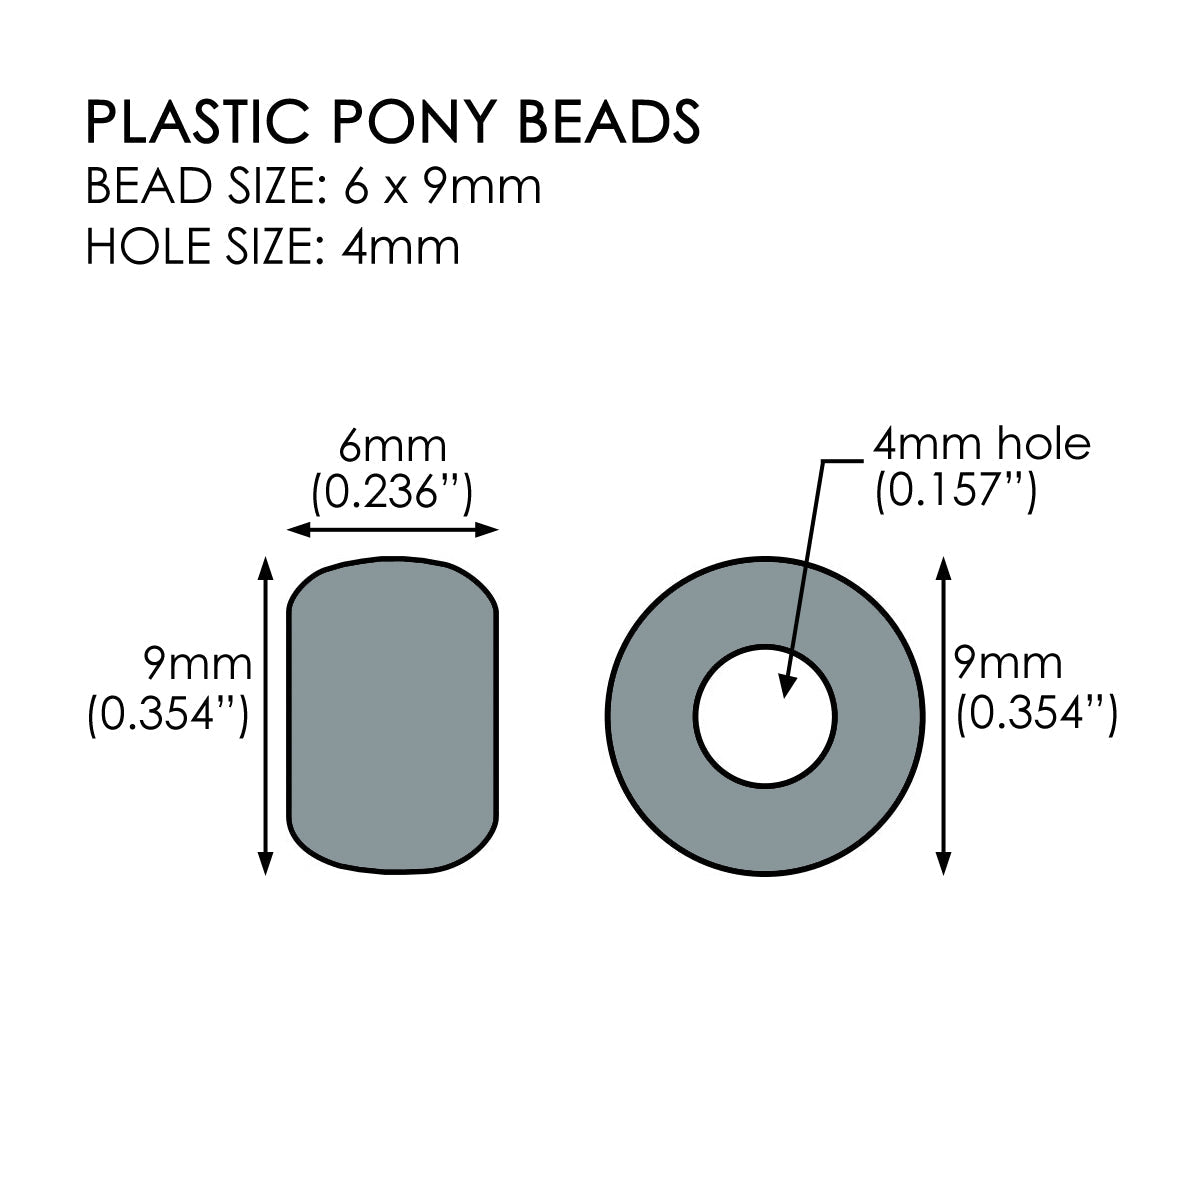 Tropical Opaque Color Kit, Plastic Pony Beads 6 x 9mm, 1000 beads